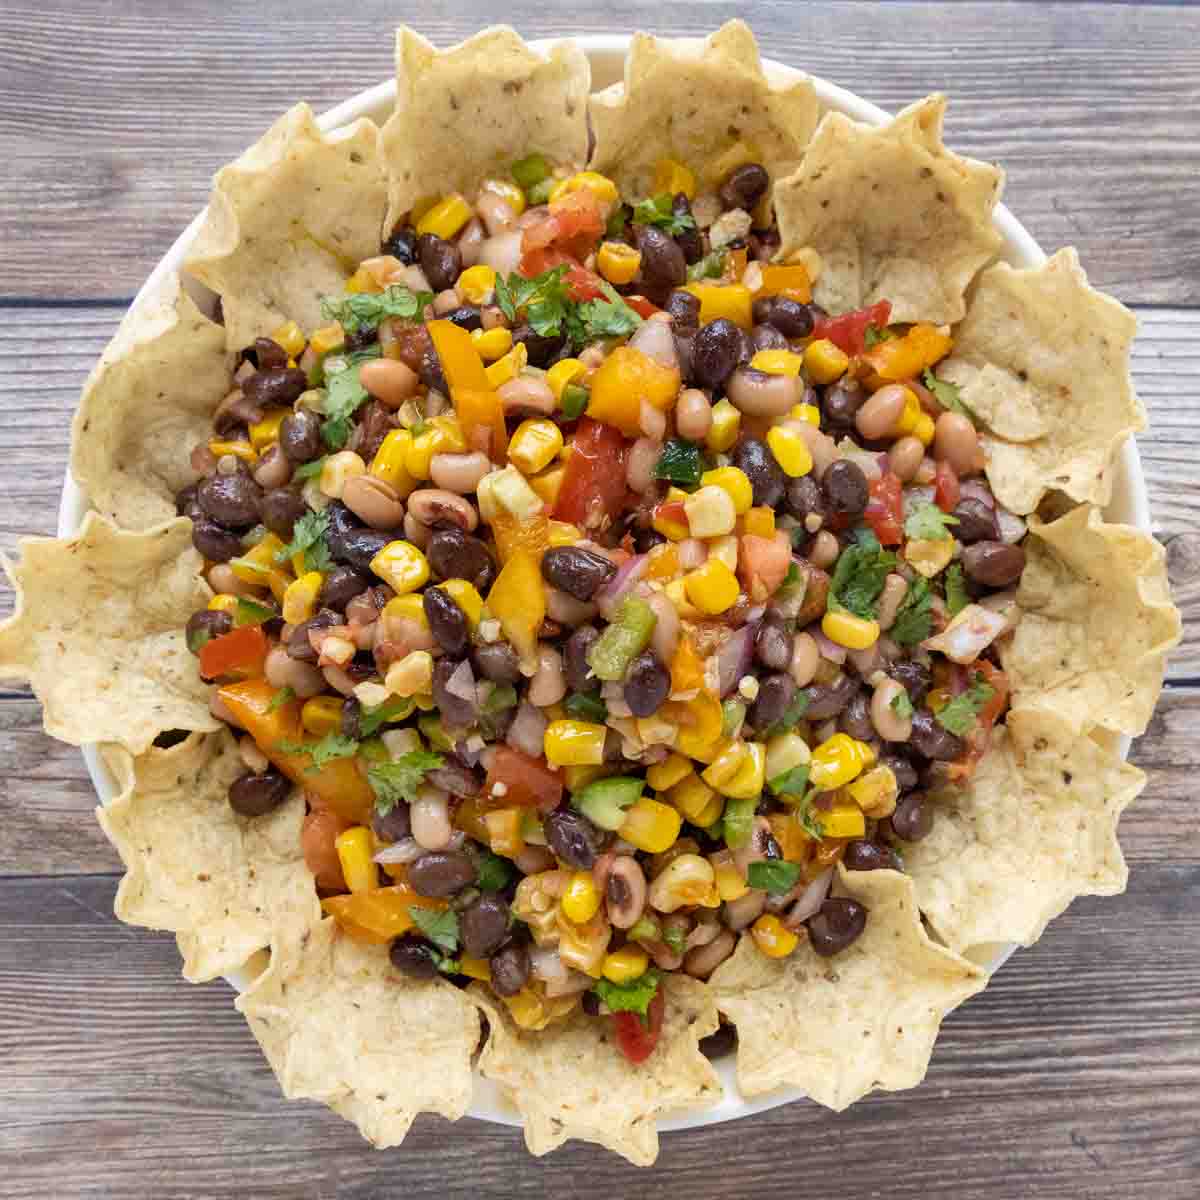 Texas caviar with tortilla chips in a bowl.